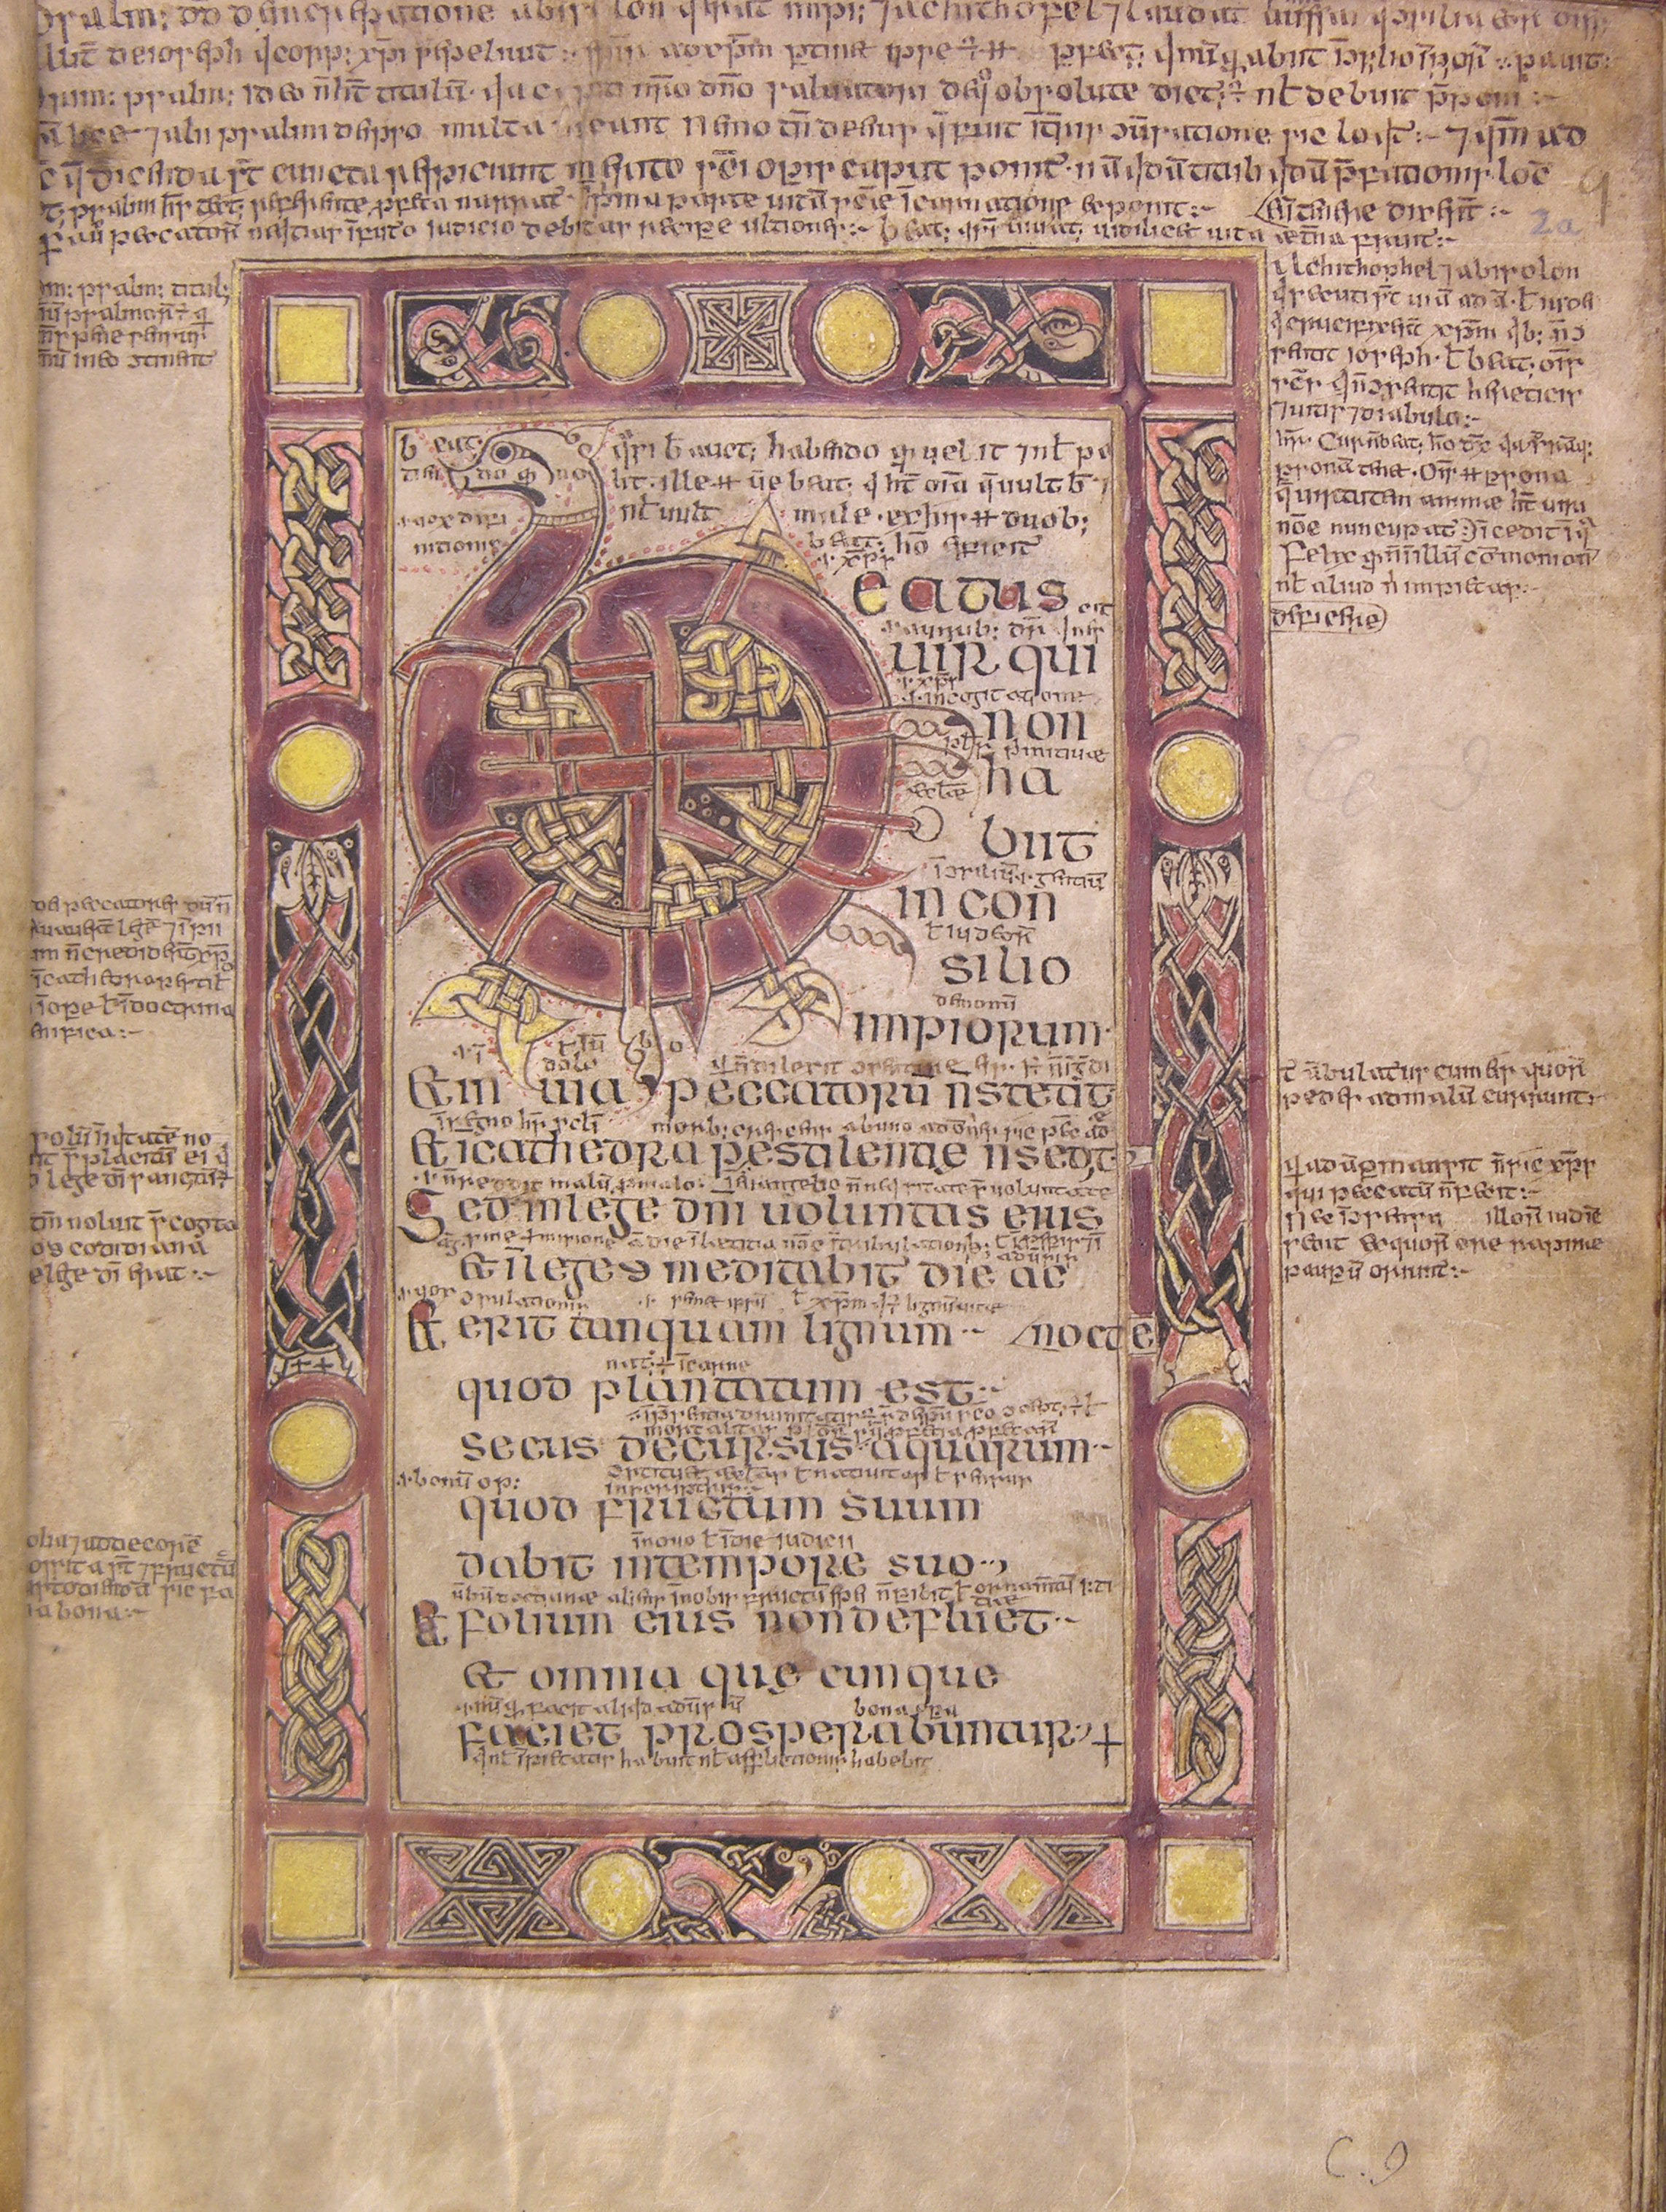 A page from a manuscript with decoration.